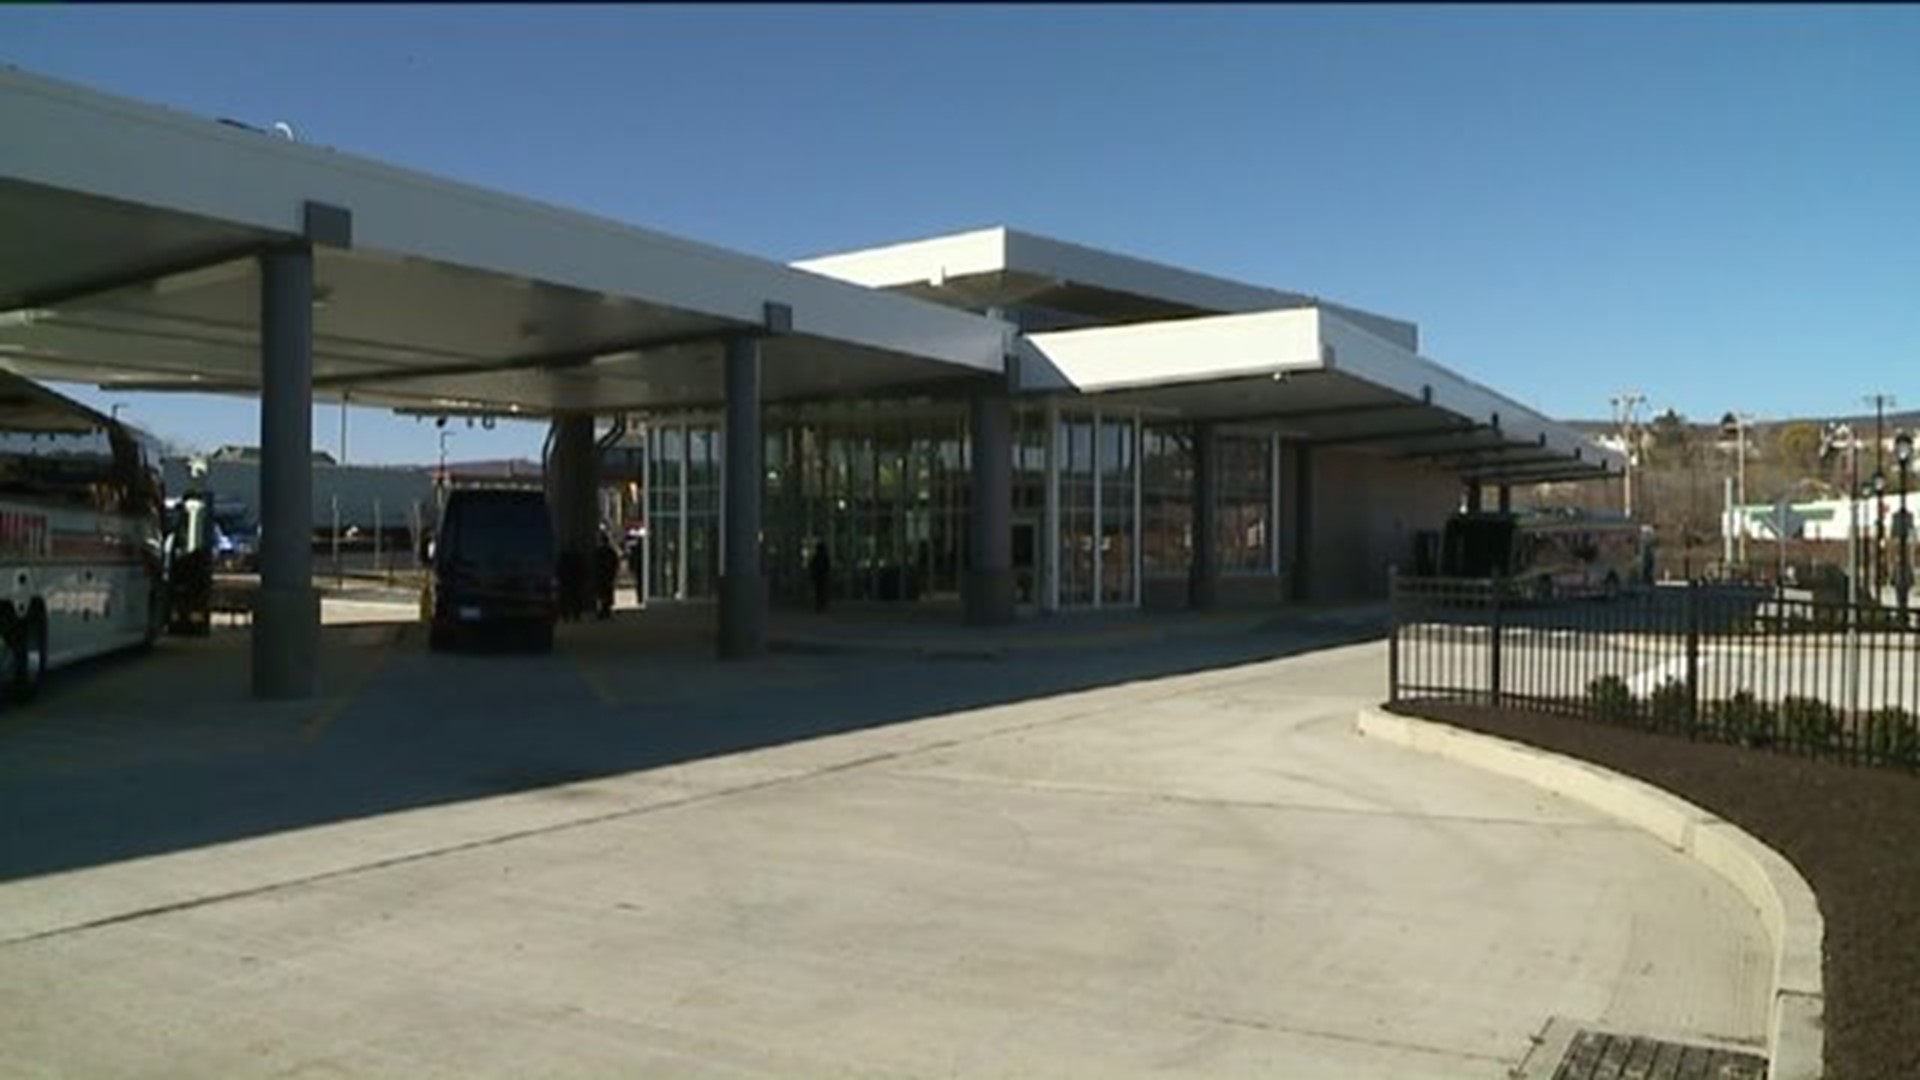 COLTS Buses Available at New Transit Center in Scranton